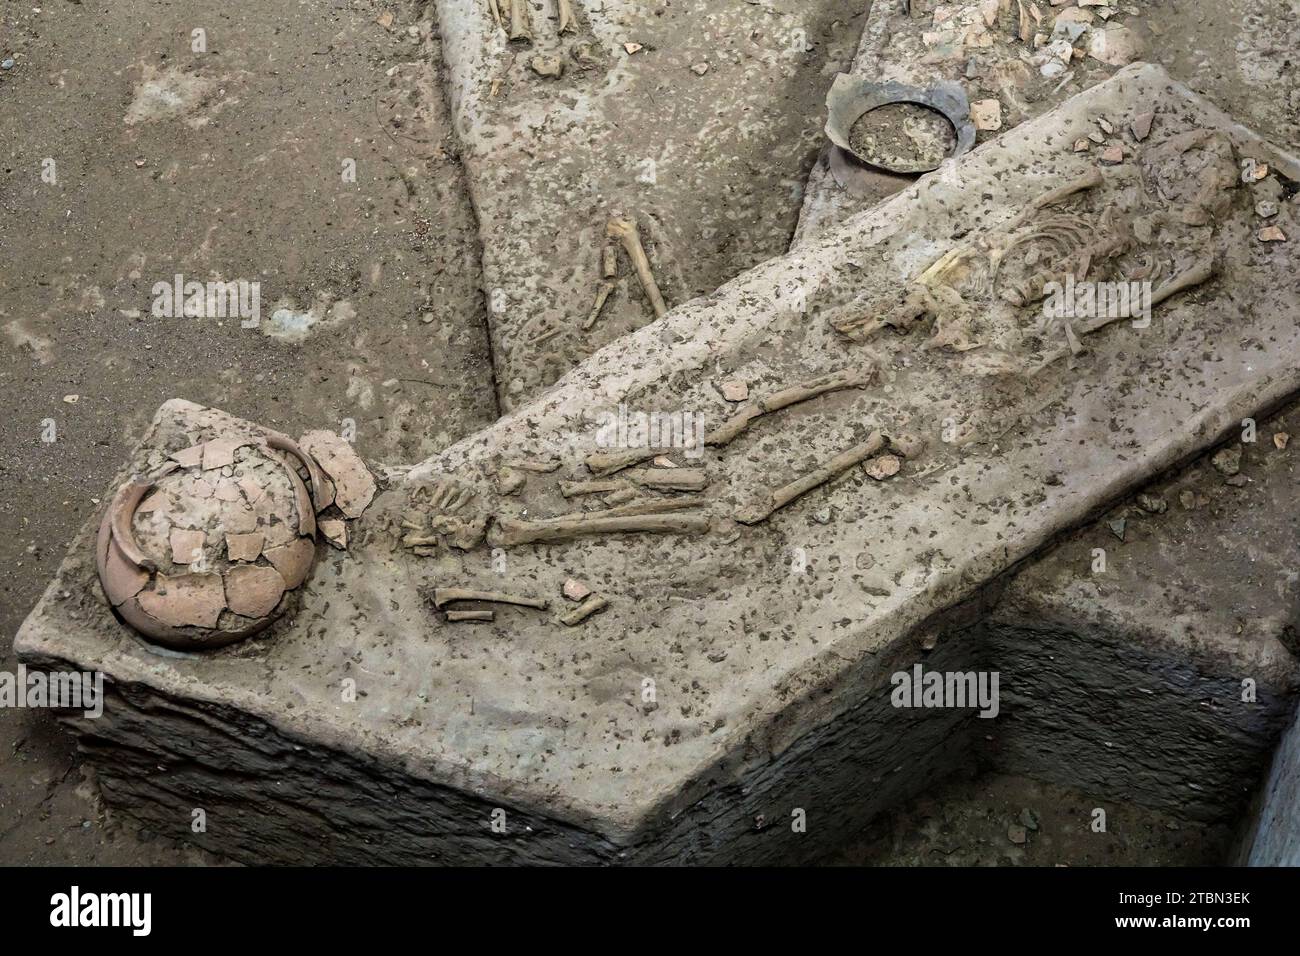 Ban Chiang national museum, Burial skeleton and potteries, Excavation site at Wat Pho Si Nai, Ban Chiang, Udon Thani, Thailand, Southeast Asia, Asia Stock Photo